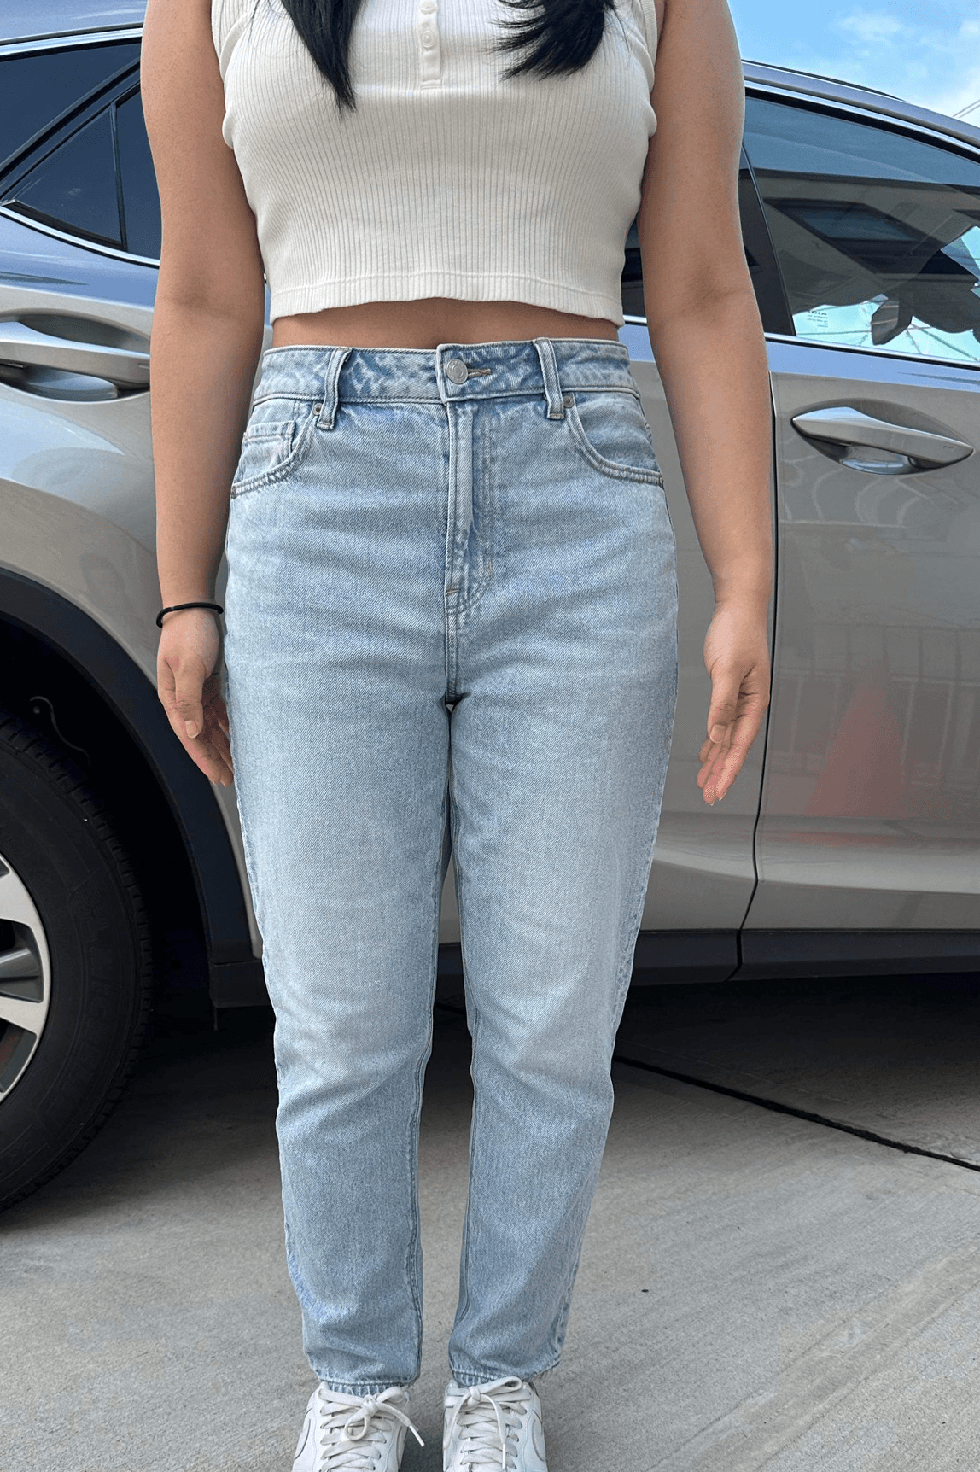 These Are The Best Jeans For Short Woman To Look Tall